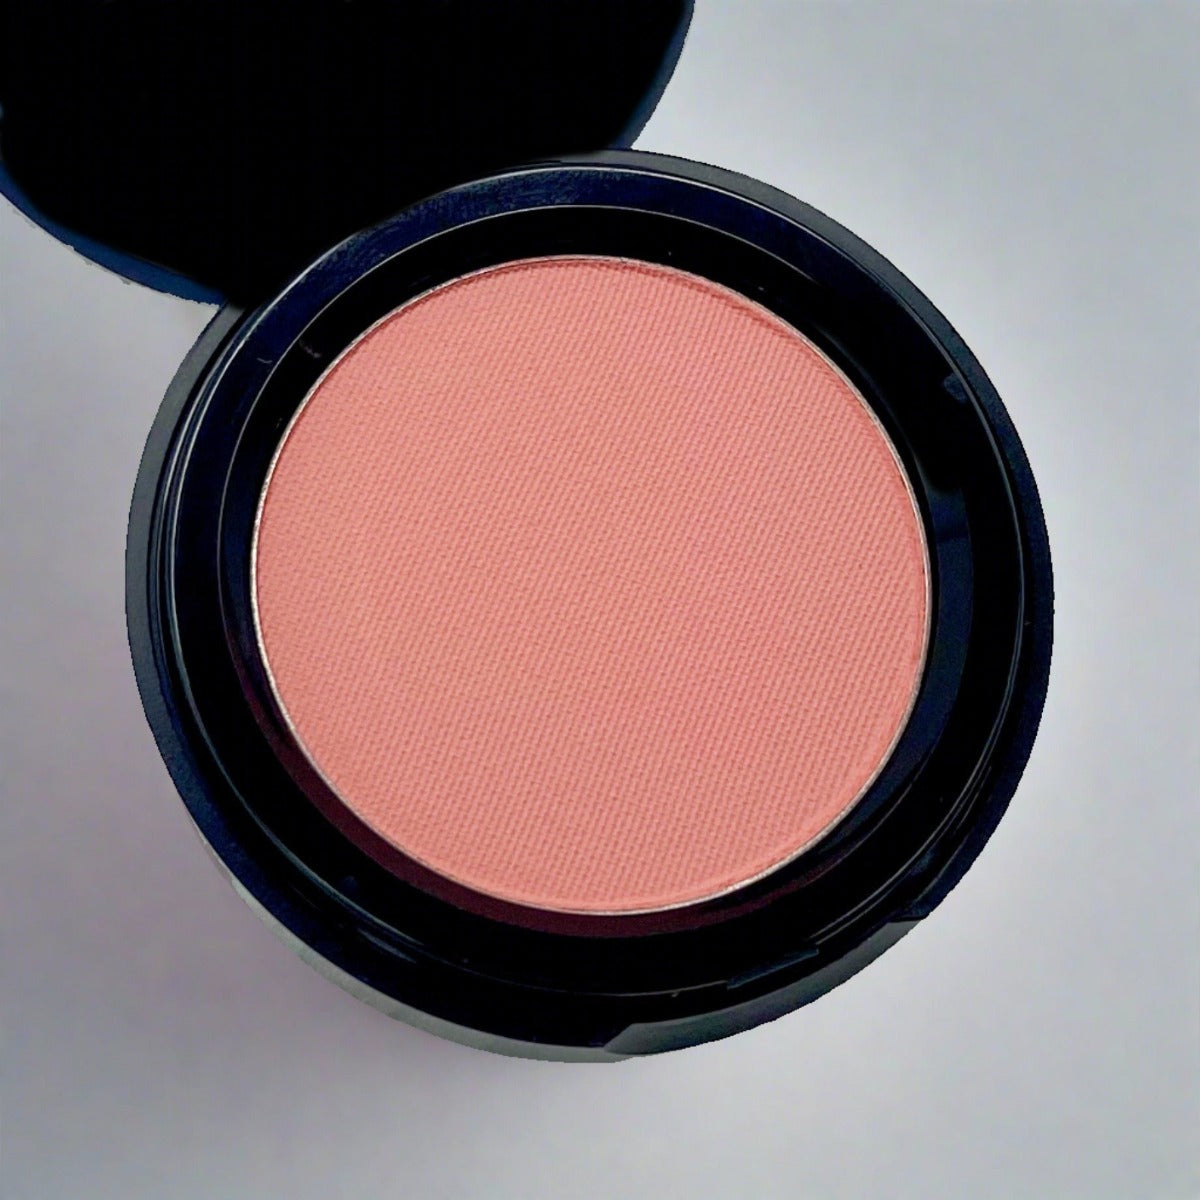 Apricot Matte Blush: A delicate peach pink shade formulated to enhance your natural blush, offering a subtle yet radiant finish for a flawless complexion